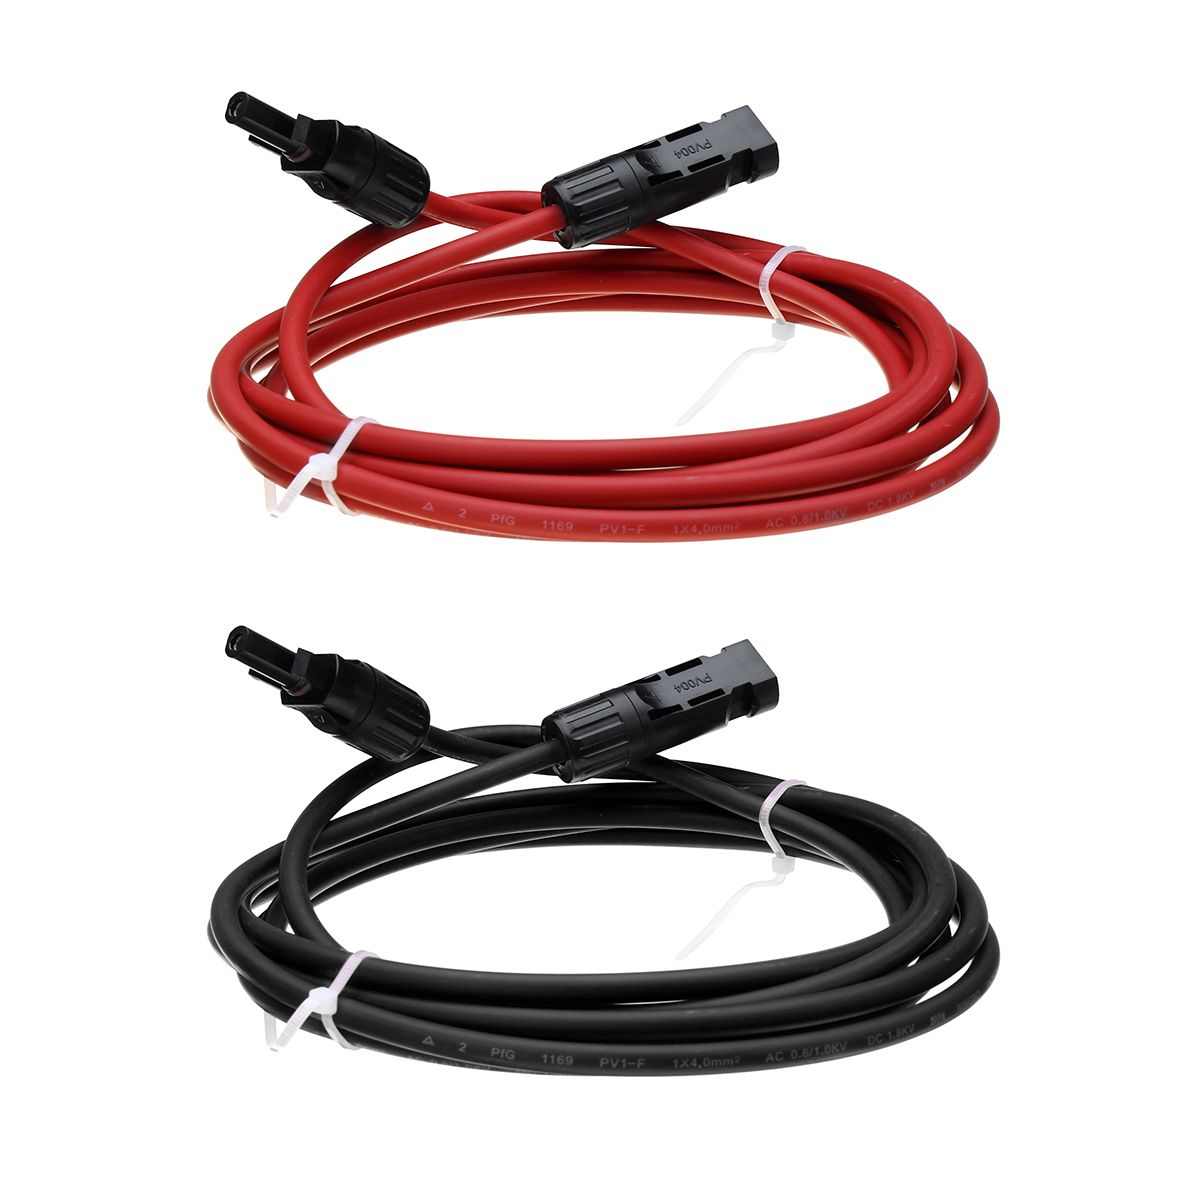 3M-AWG12-Black-or-Red-MC4-Connector-Solar-Panel-Extension-Cable-Wire-1298659